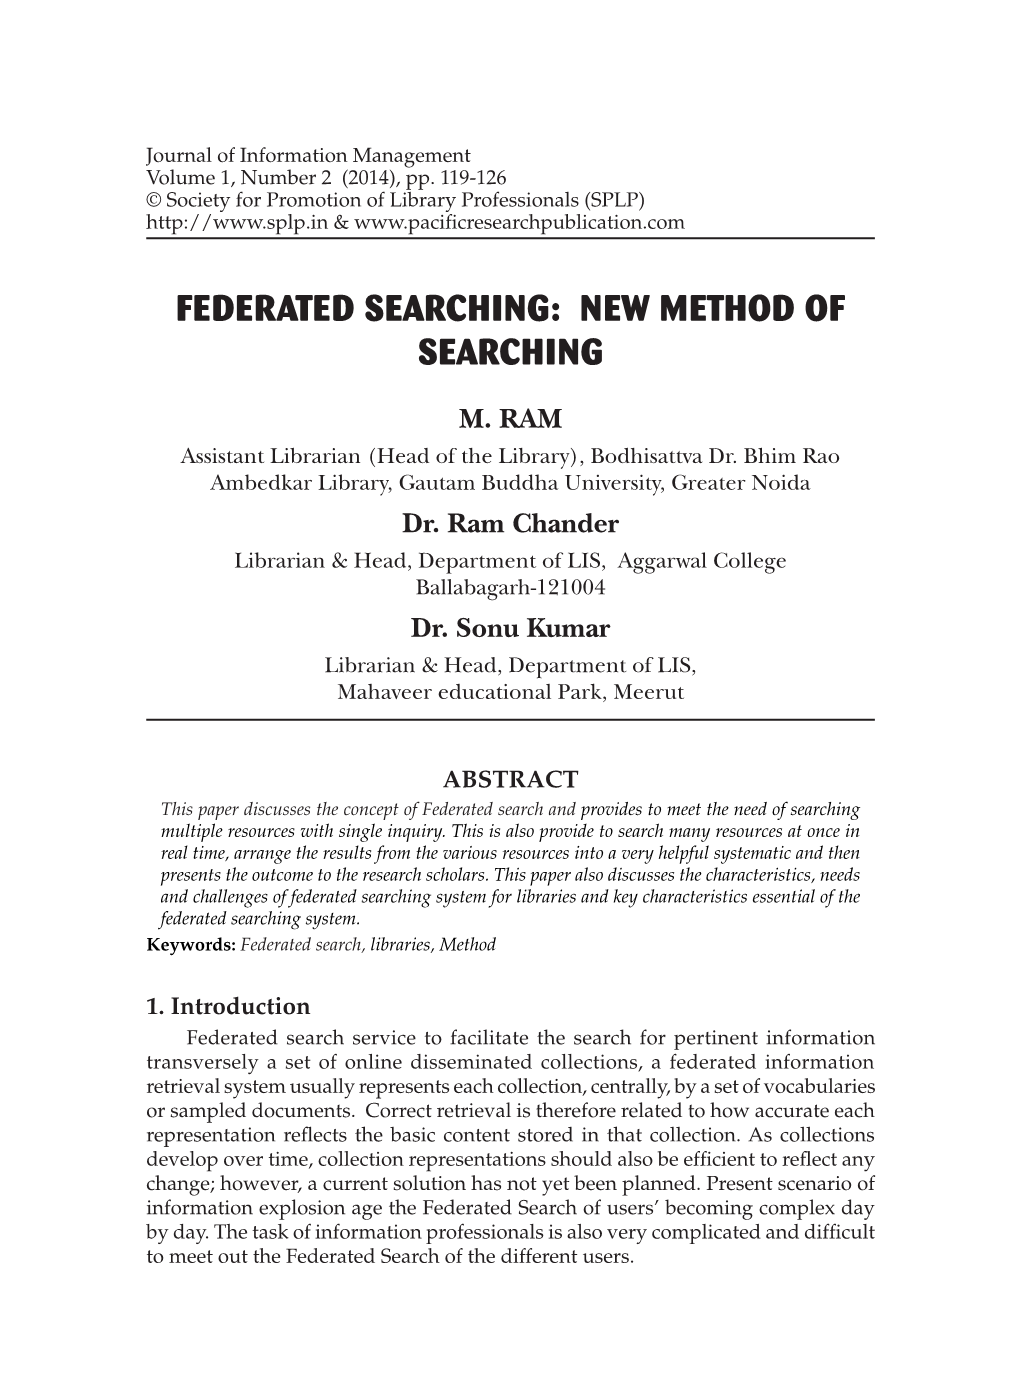 Federated Searching: New Method of Searching